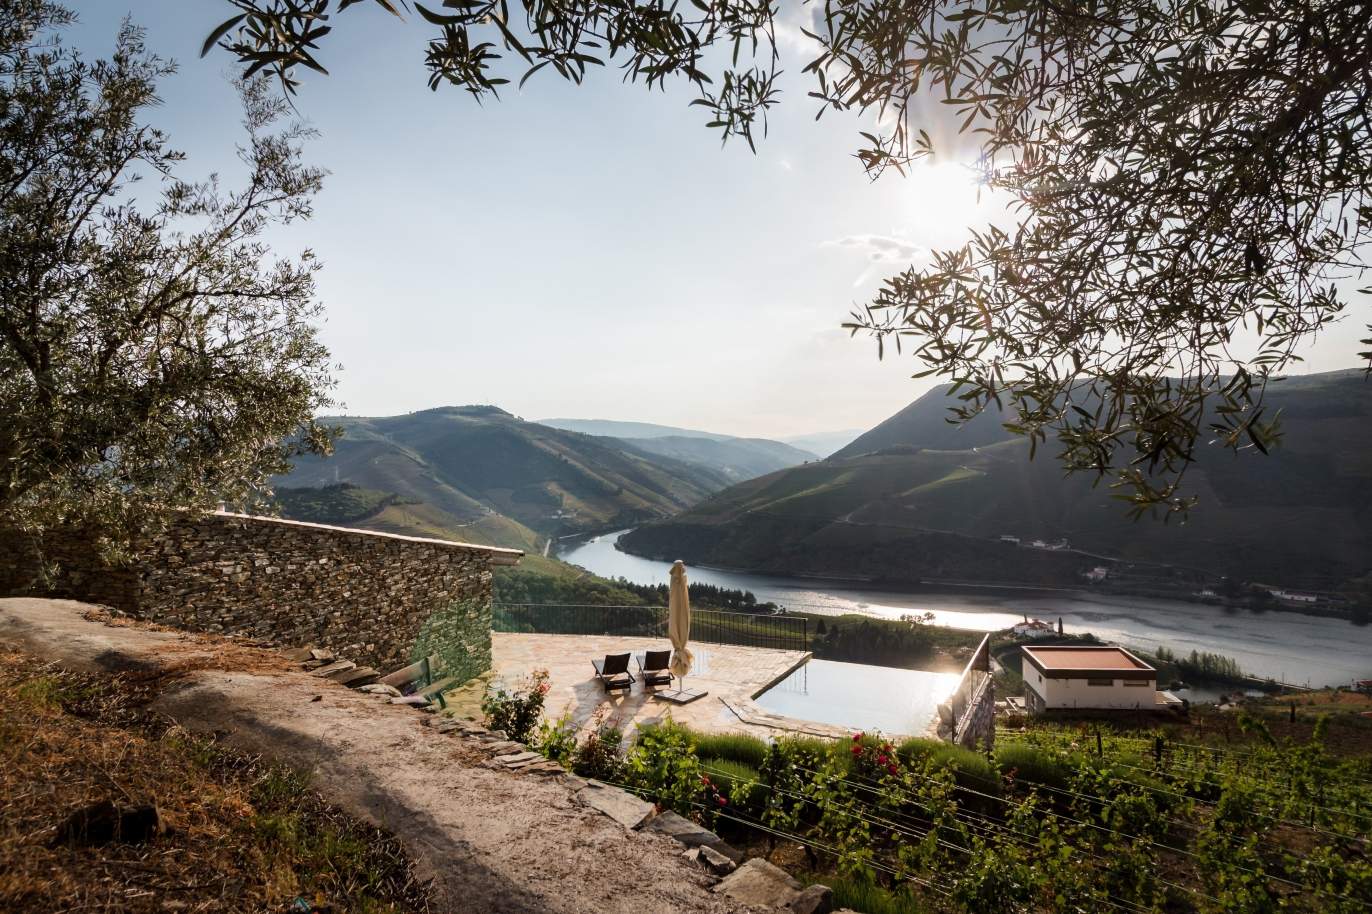 Sale country house in vineyard w/ river views, Douro Valley, Portugal_171535